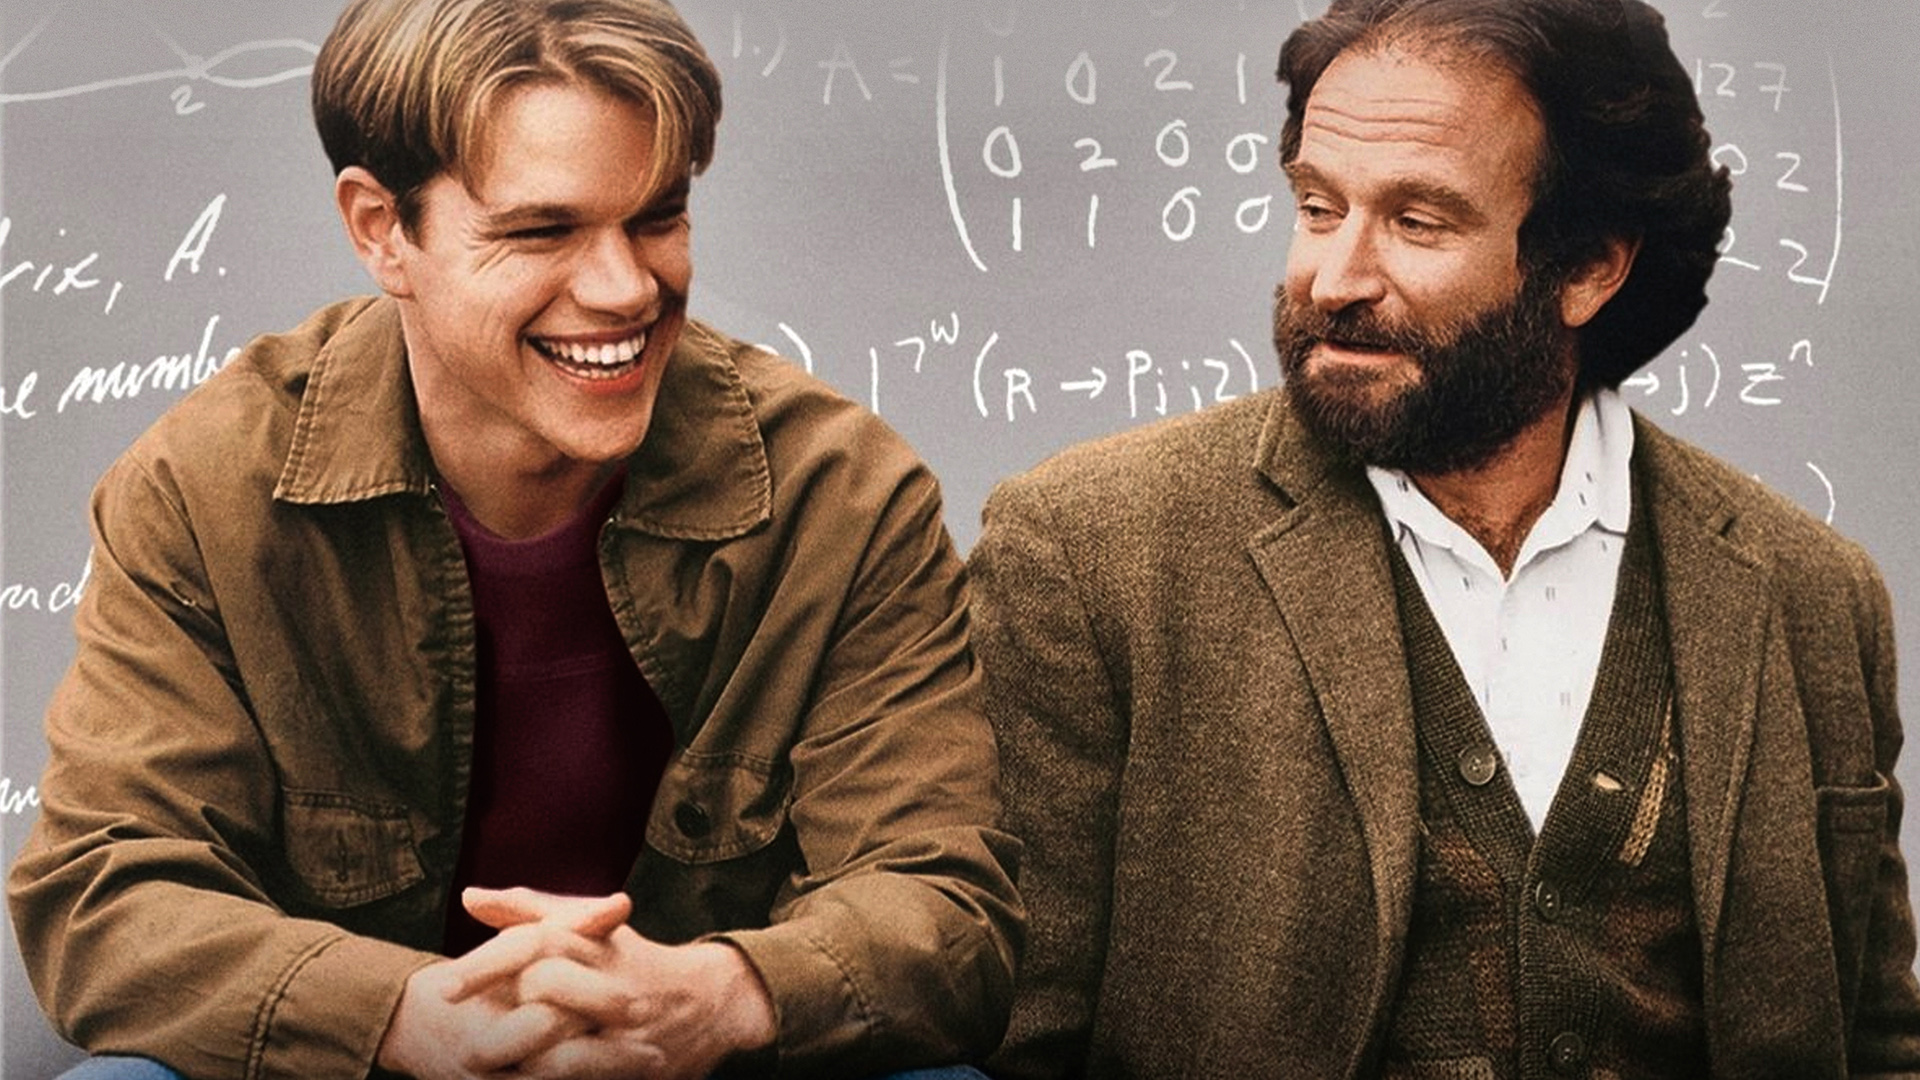 classic movies - good will hunting - n1024 0 200 Iloc 127 z Fis, A. e number It N N. 17h Rp; ; 2 w j za nd in